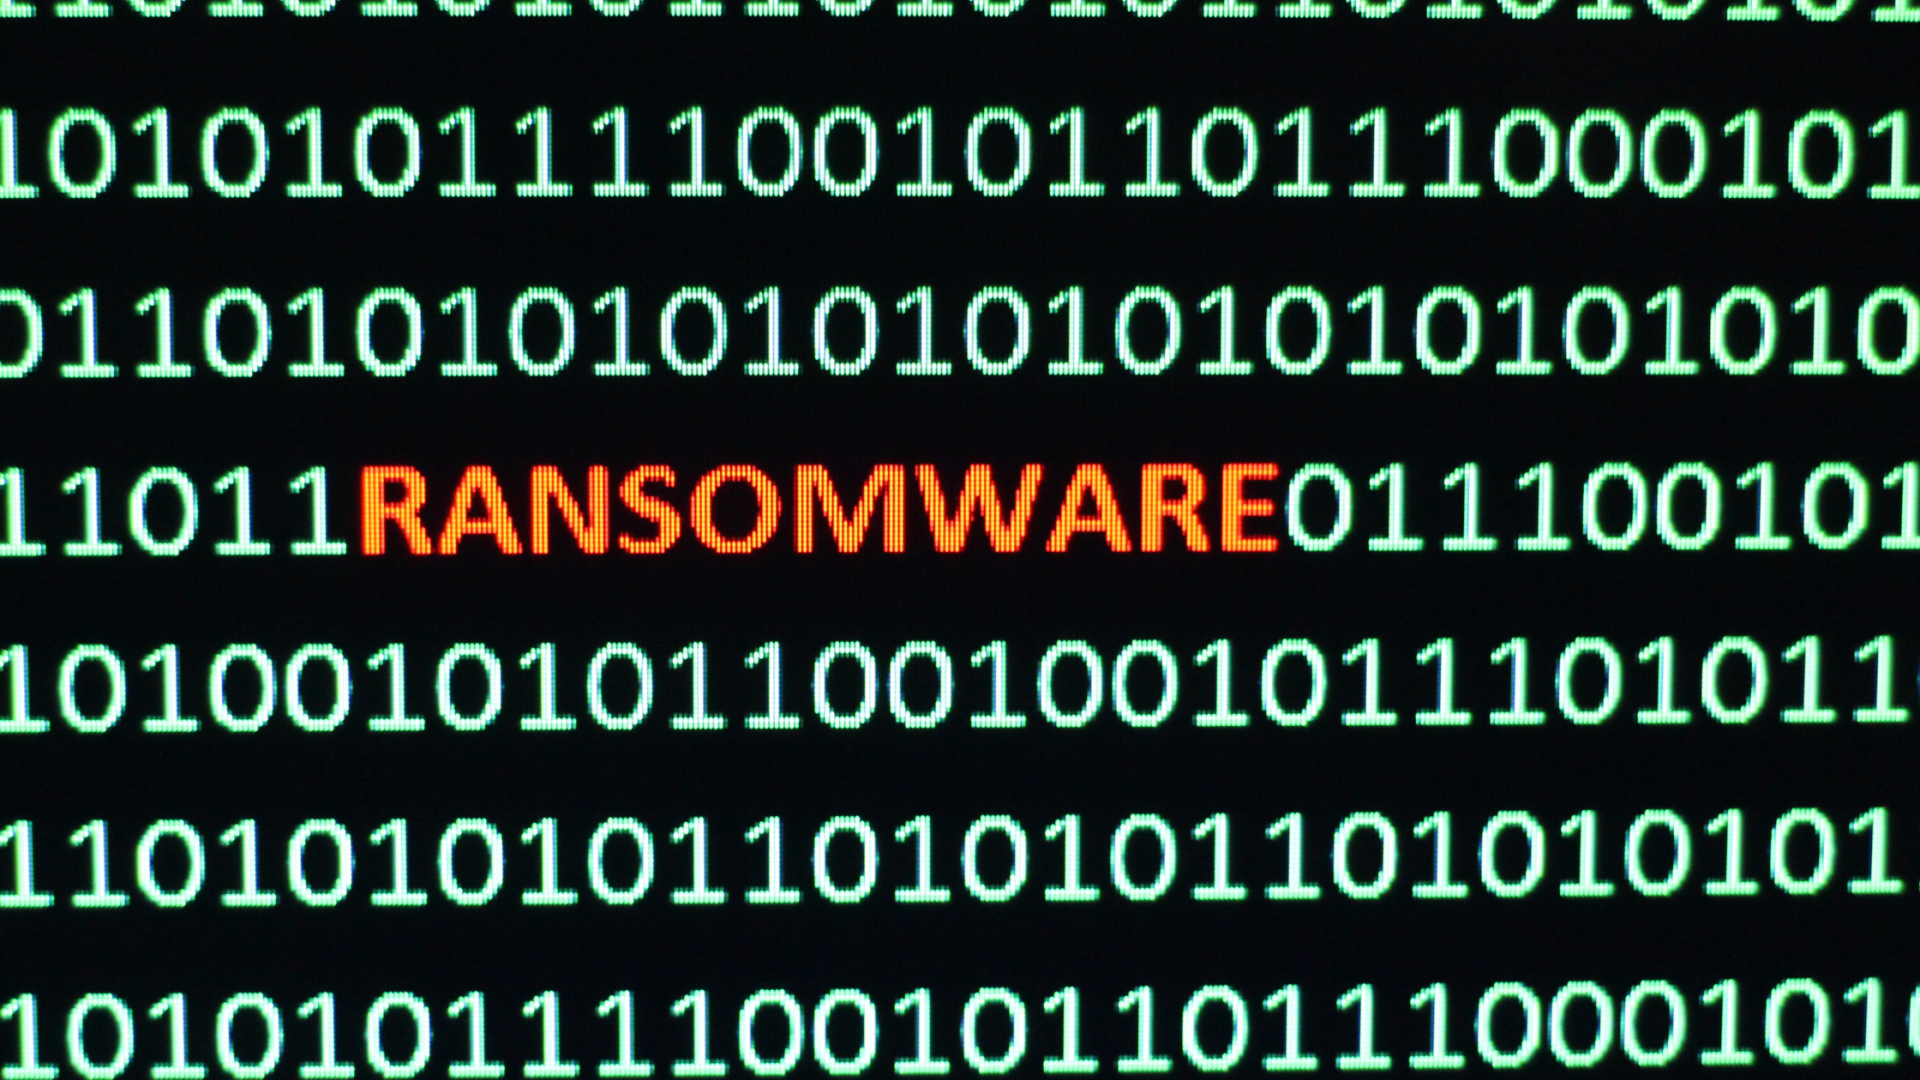 Advice for Avoiding a Ransomware Attack